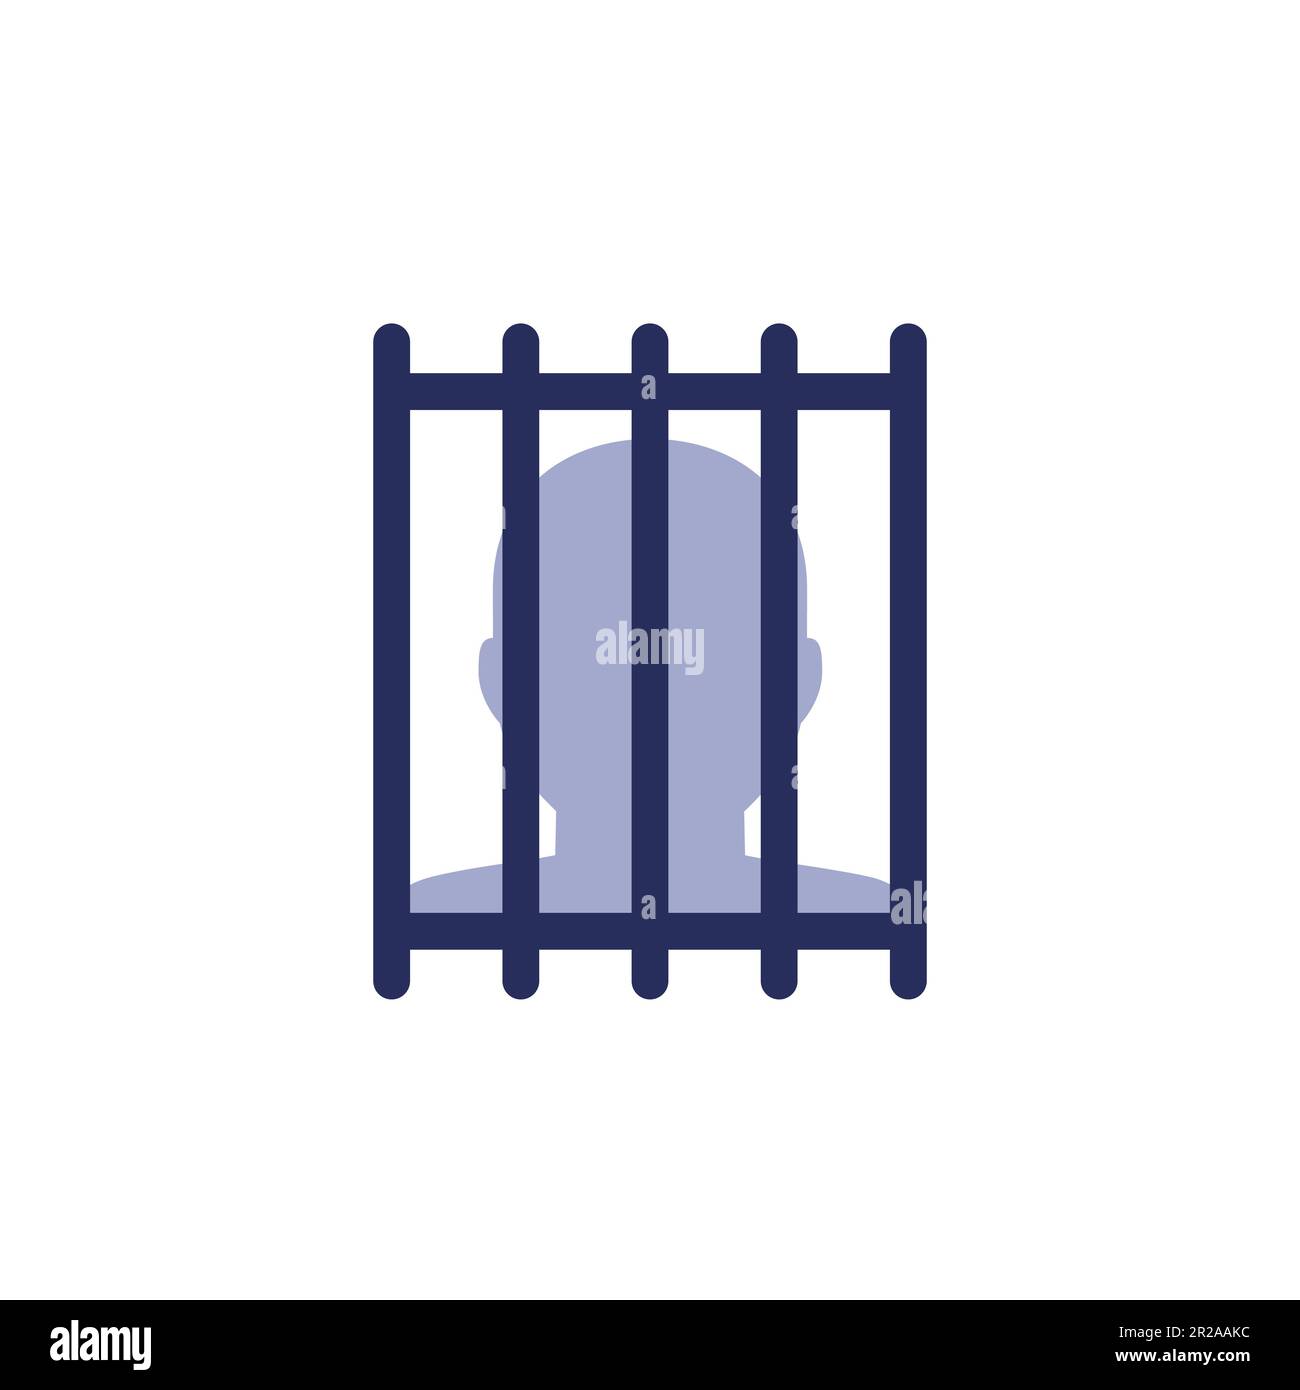 convict or inmate in a cell icon Stock Vector